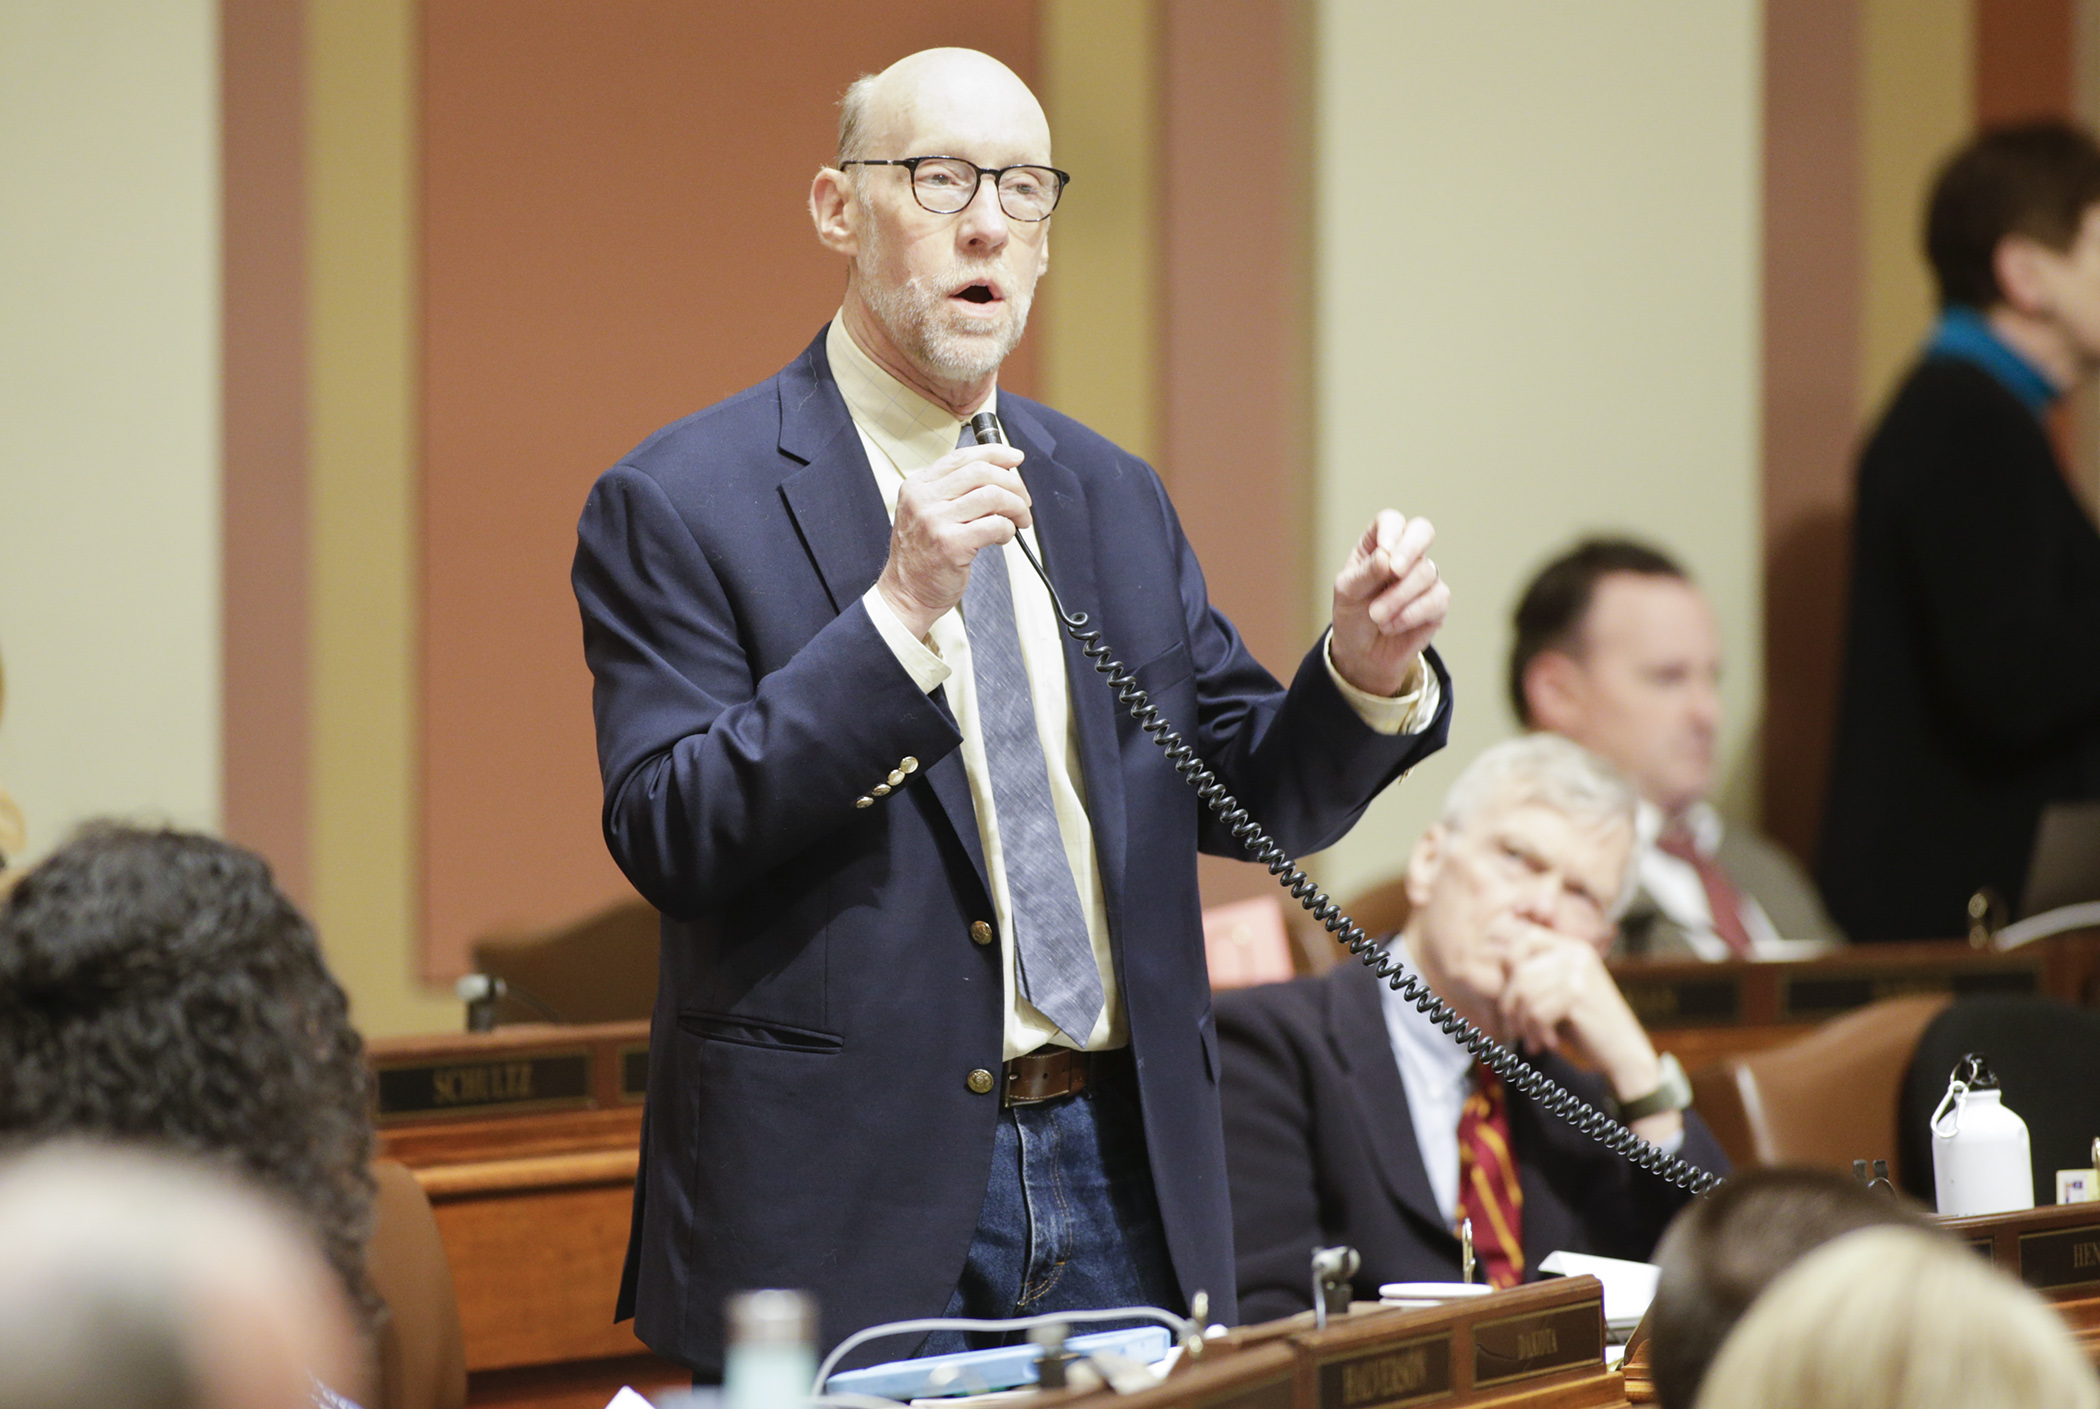 Rep. Jim Davnie, chair of the House Education Finance Division, describes provisions of the omnibus education finance and policy bill during special session floor debate May 25.